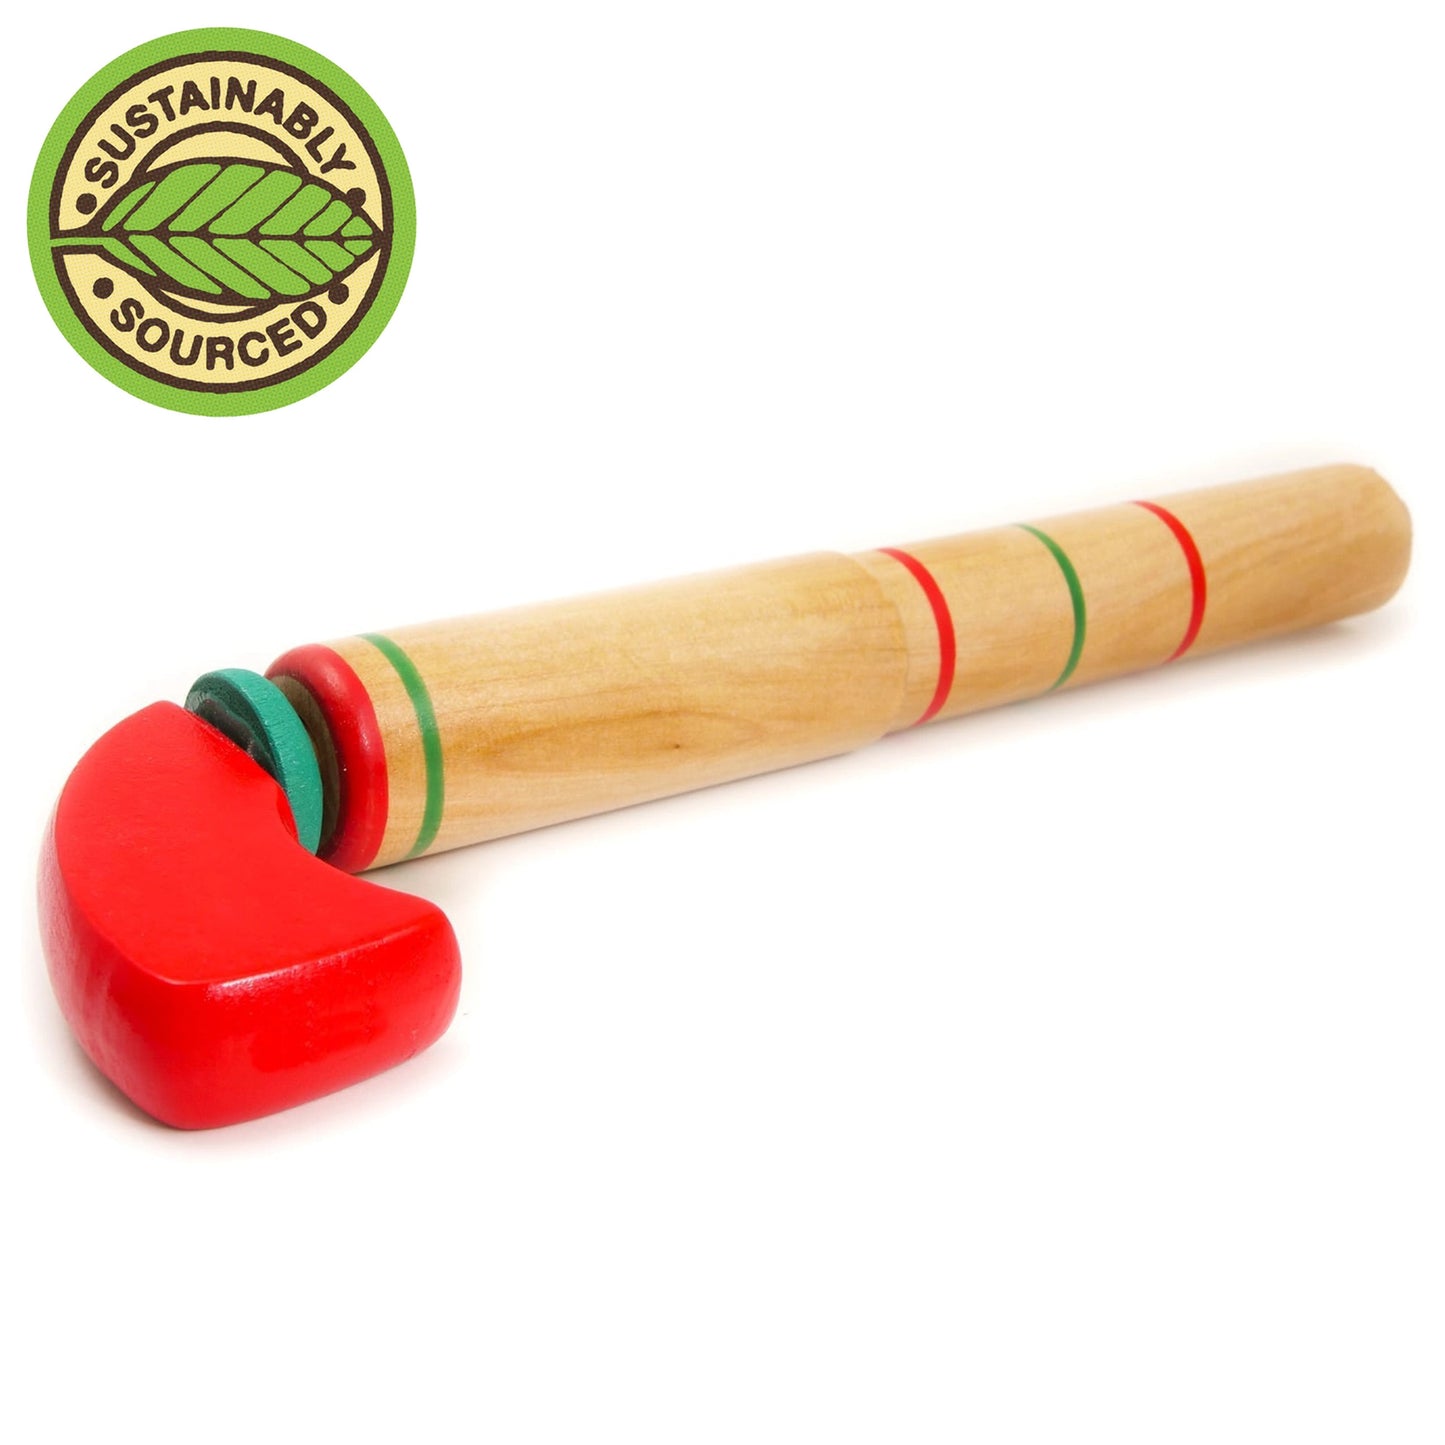 Wooden Pop Gun (Toy) - House of Marbles - The Forgotten Toy Shop